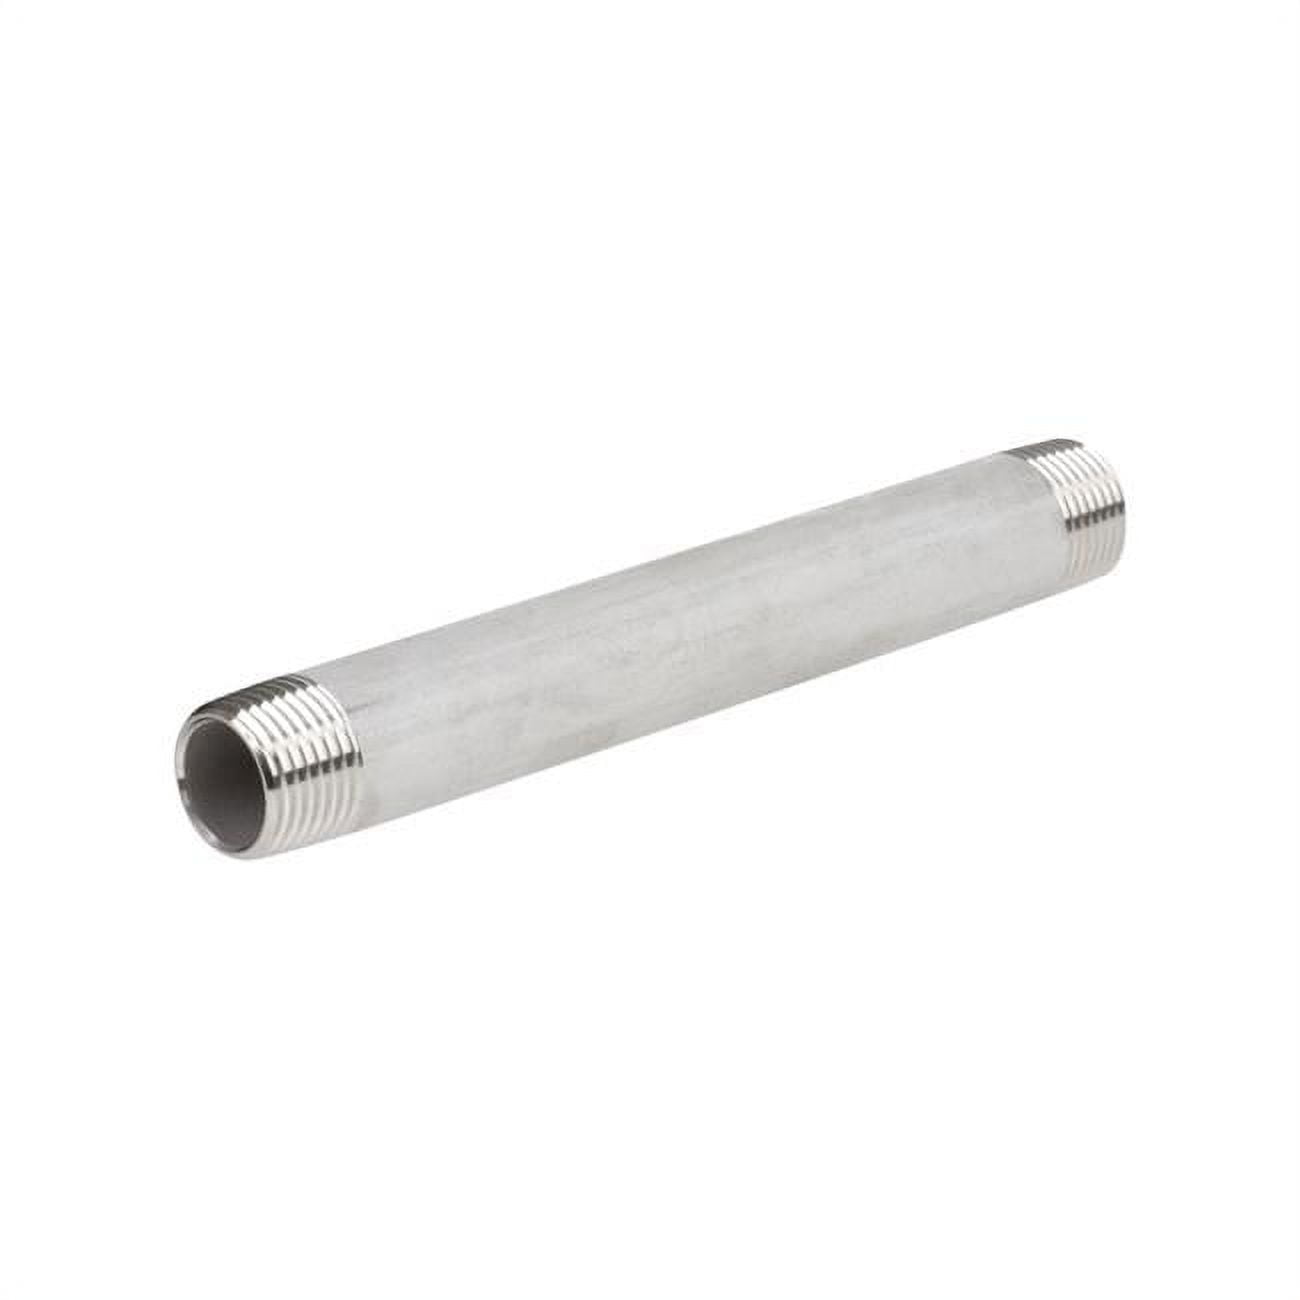 4809992 Stainless Steel Pipe Nipple - 1 In. X 1 Dia. X 6 In.